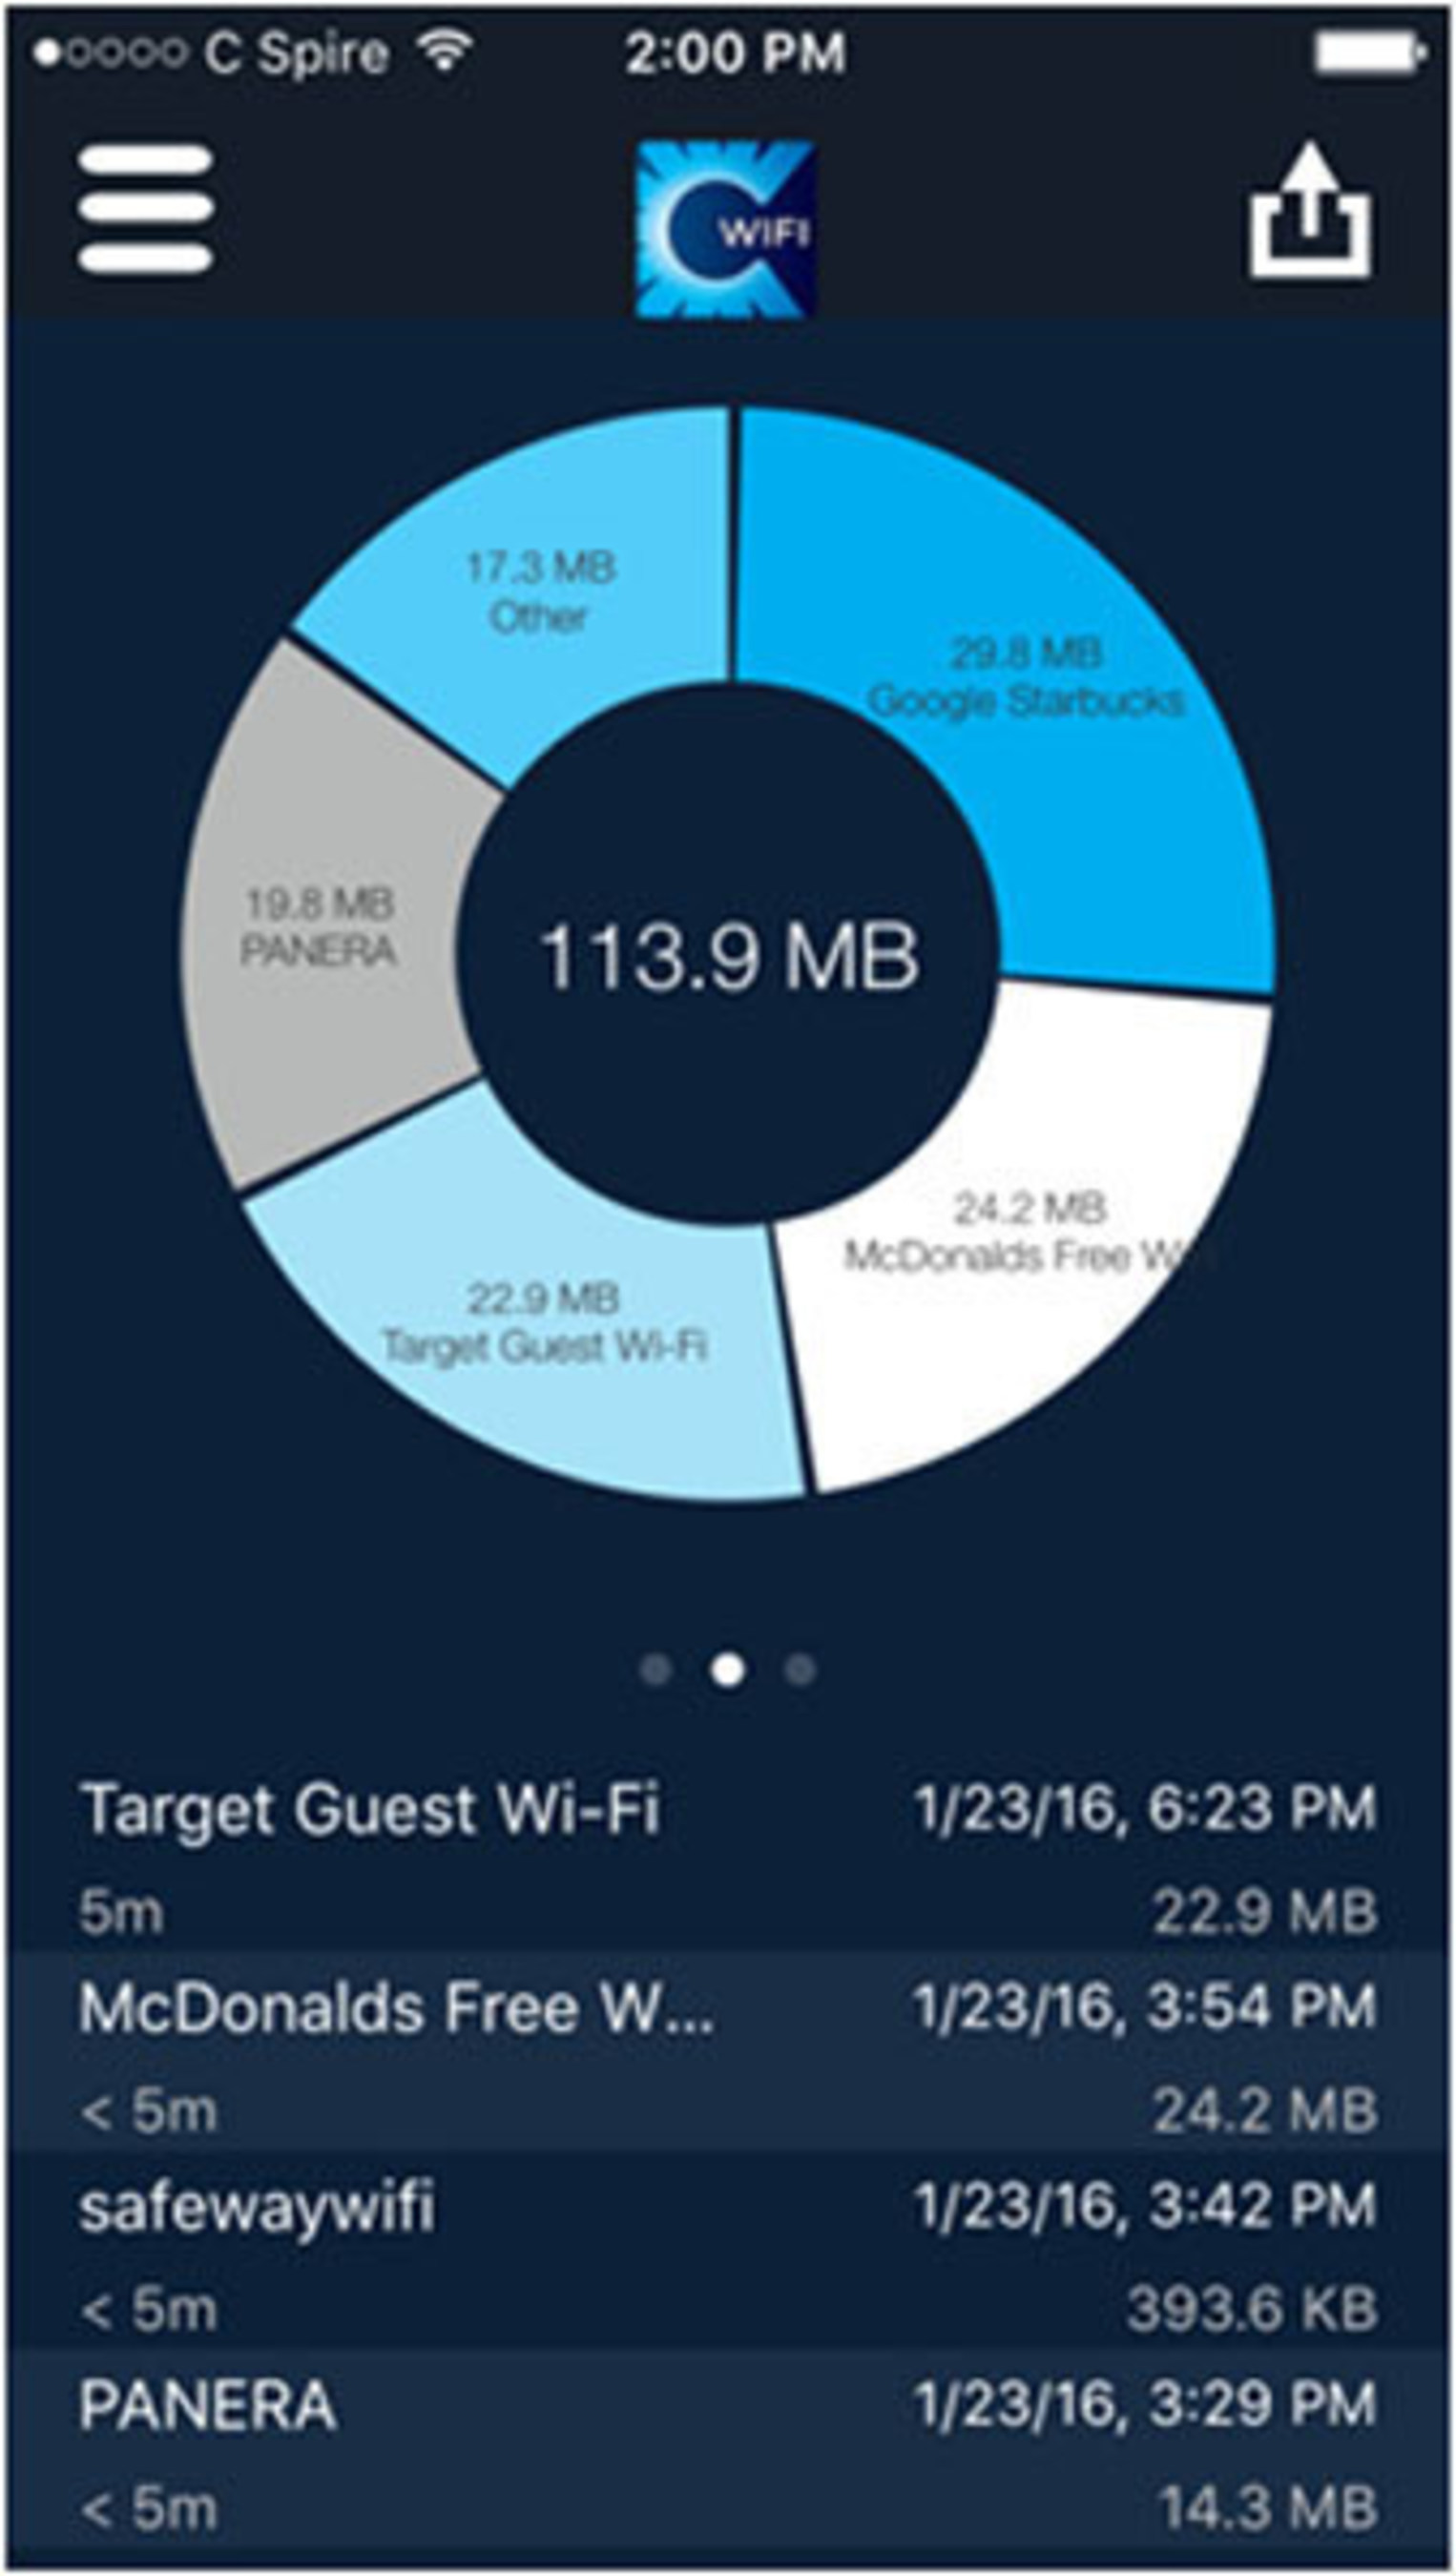 C Spire has introduced a new Wi-Fi hotspot connection service for its customers who own smartphones with the Apple iOS.  The service, called WiFi On, is managed through an app that tracks and displays data usage and savings.